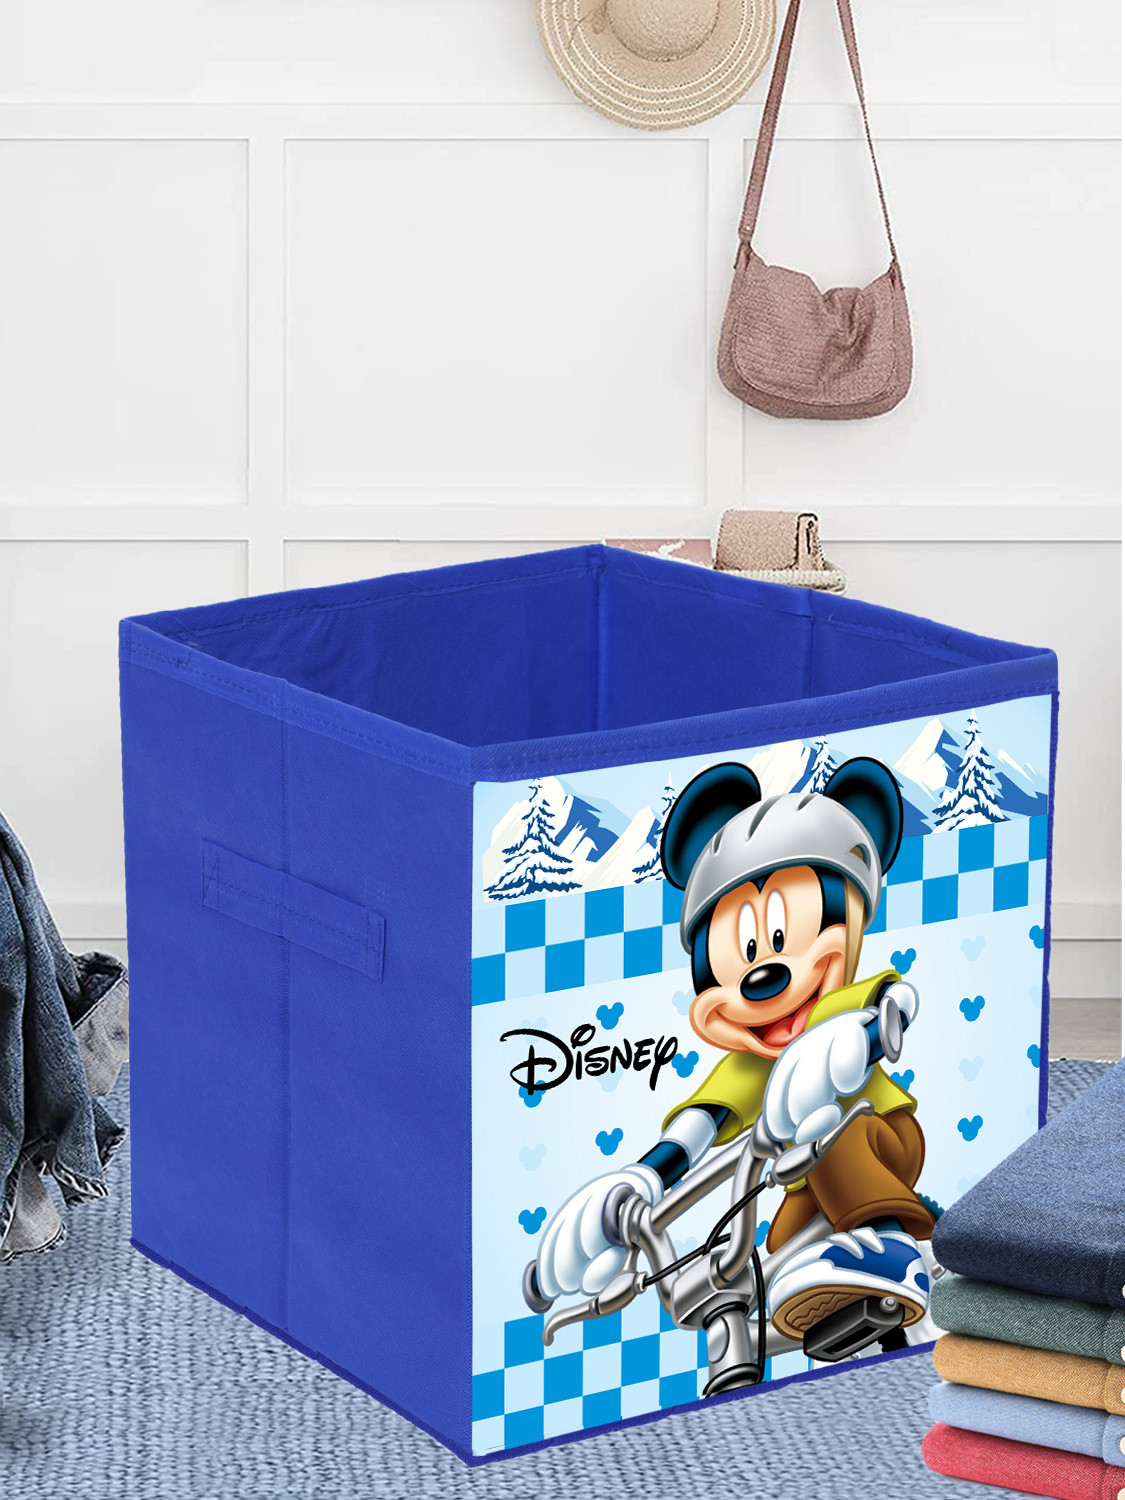 Kuber Industries Disney Mickey Print Durable & Collapsible Square Storage Box|Clothes Organizer With Handle,.(Blue)